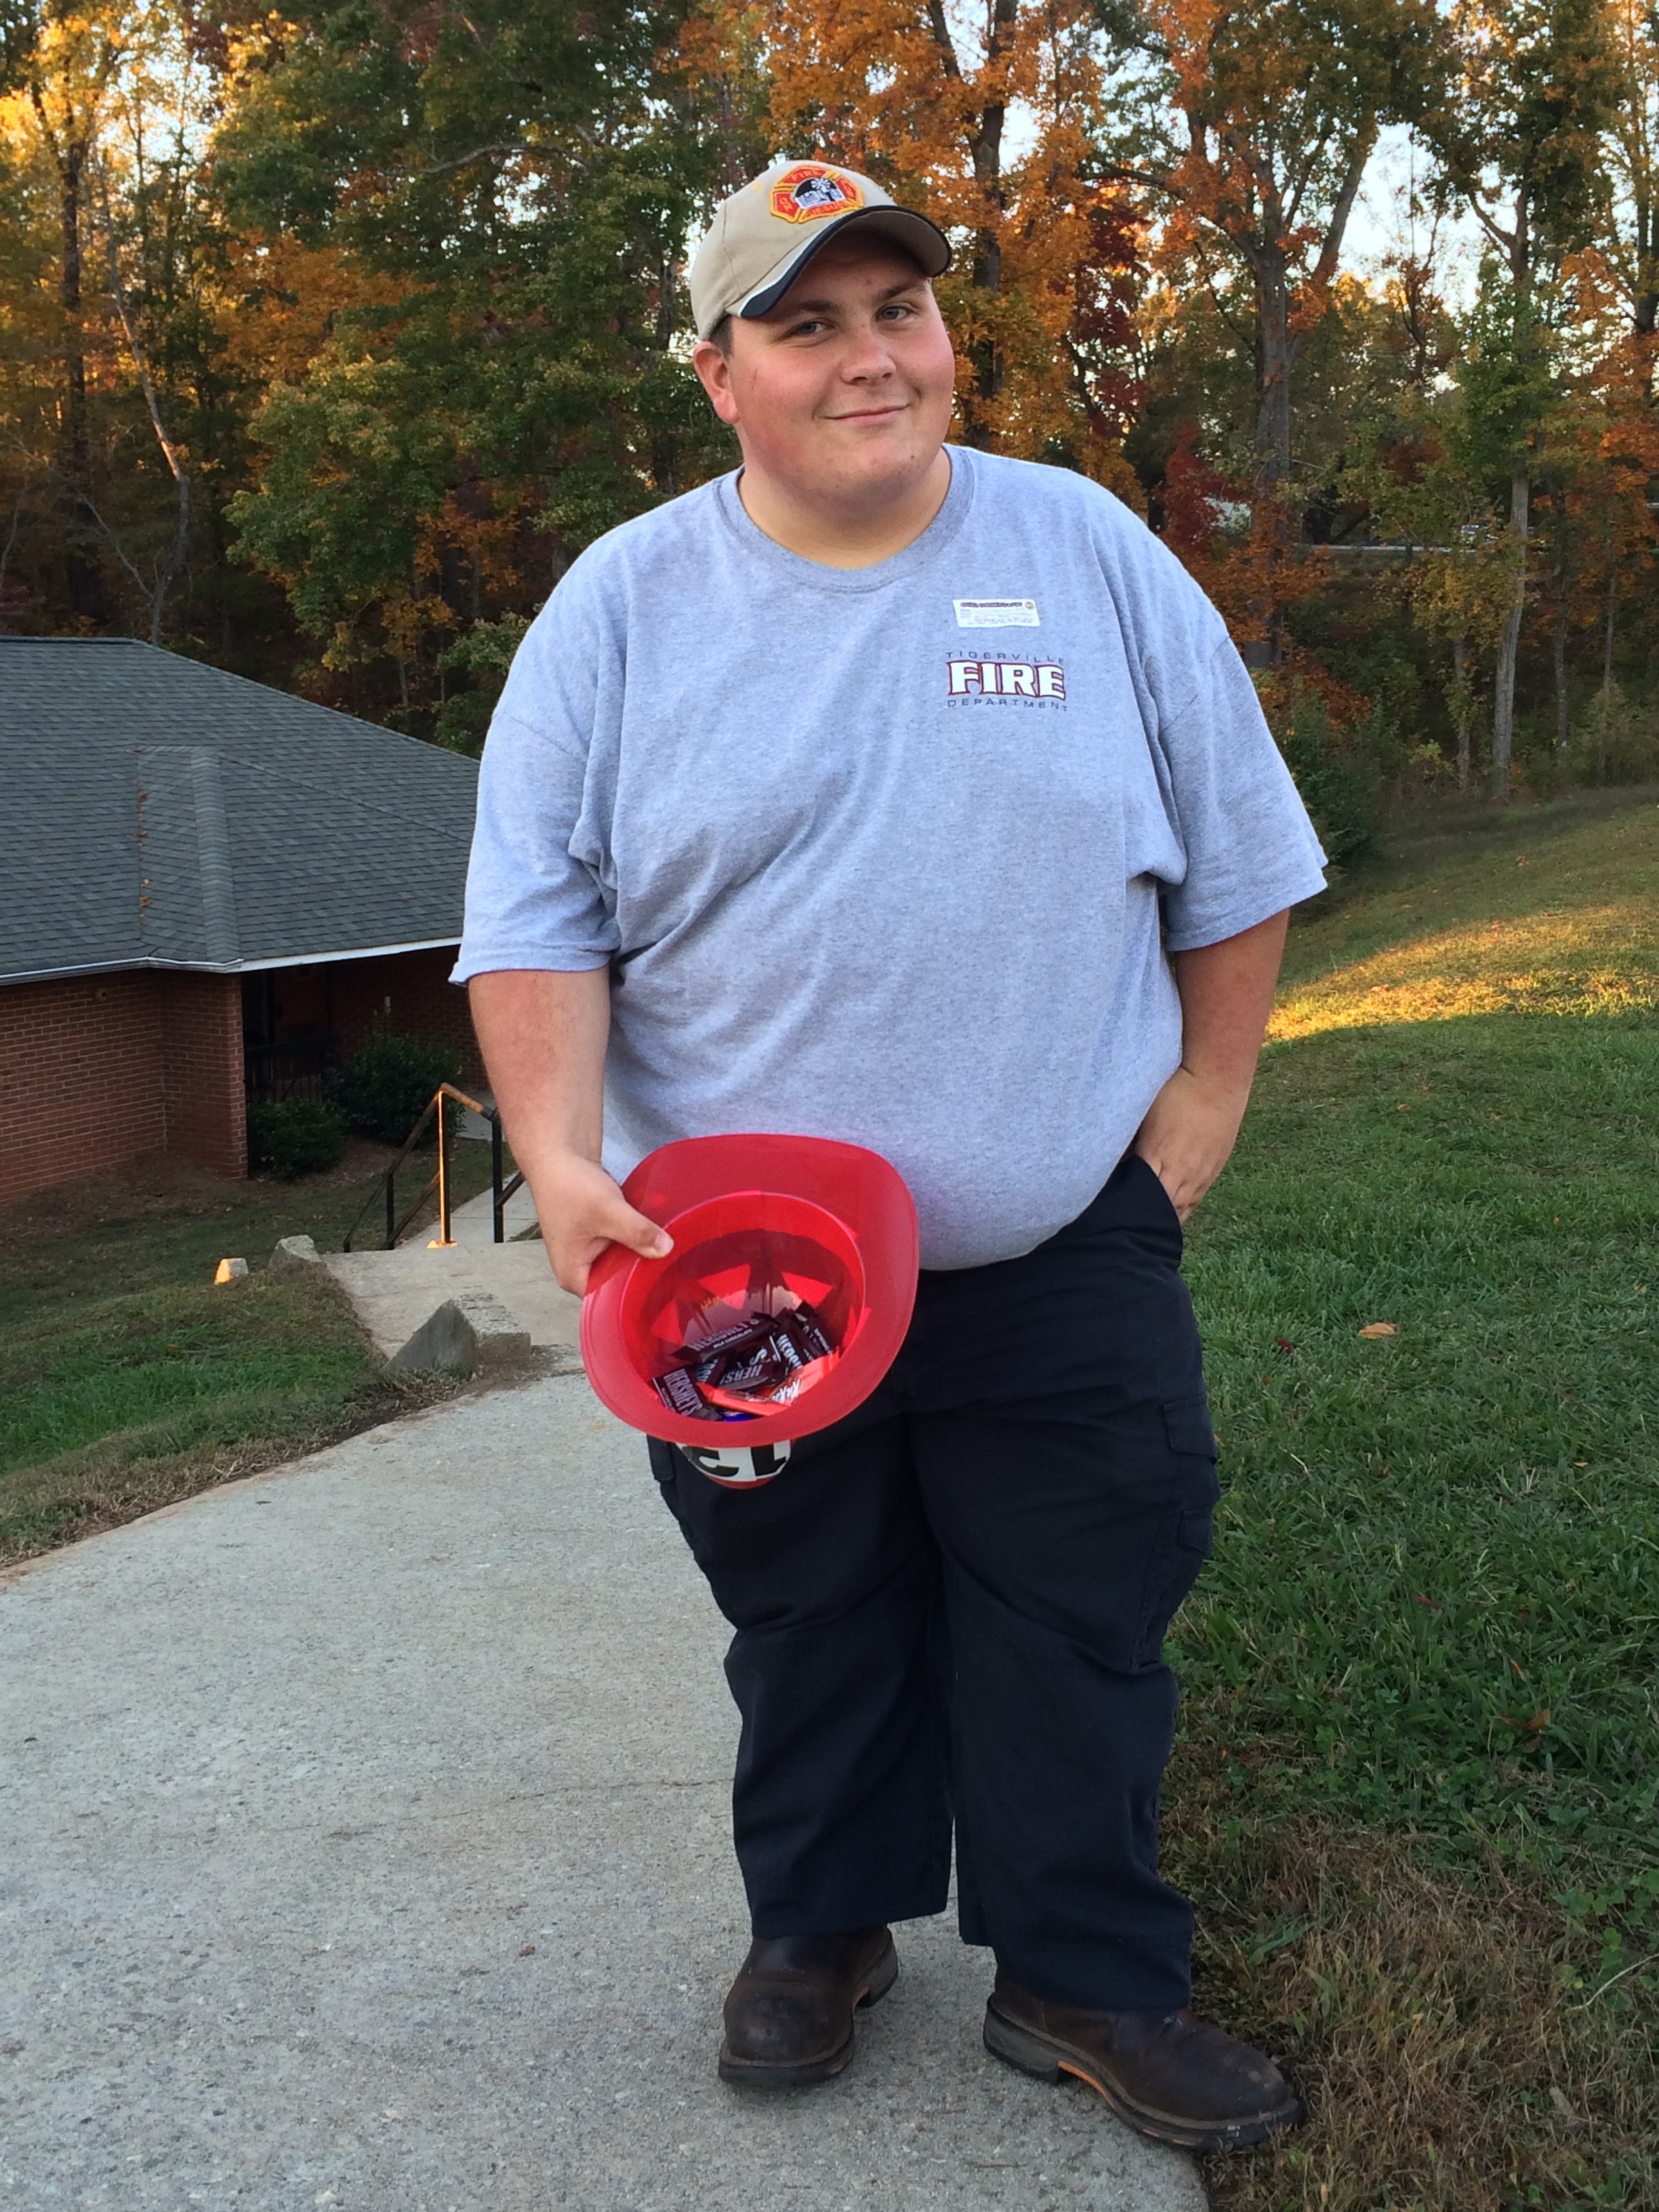 Conley Trammell handed out candy to trick-or-treaters.